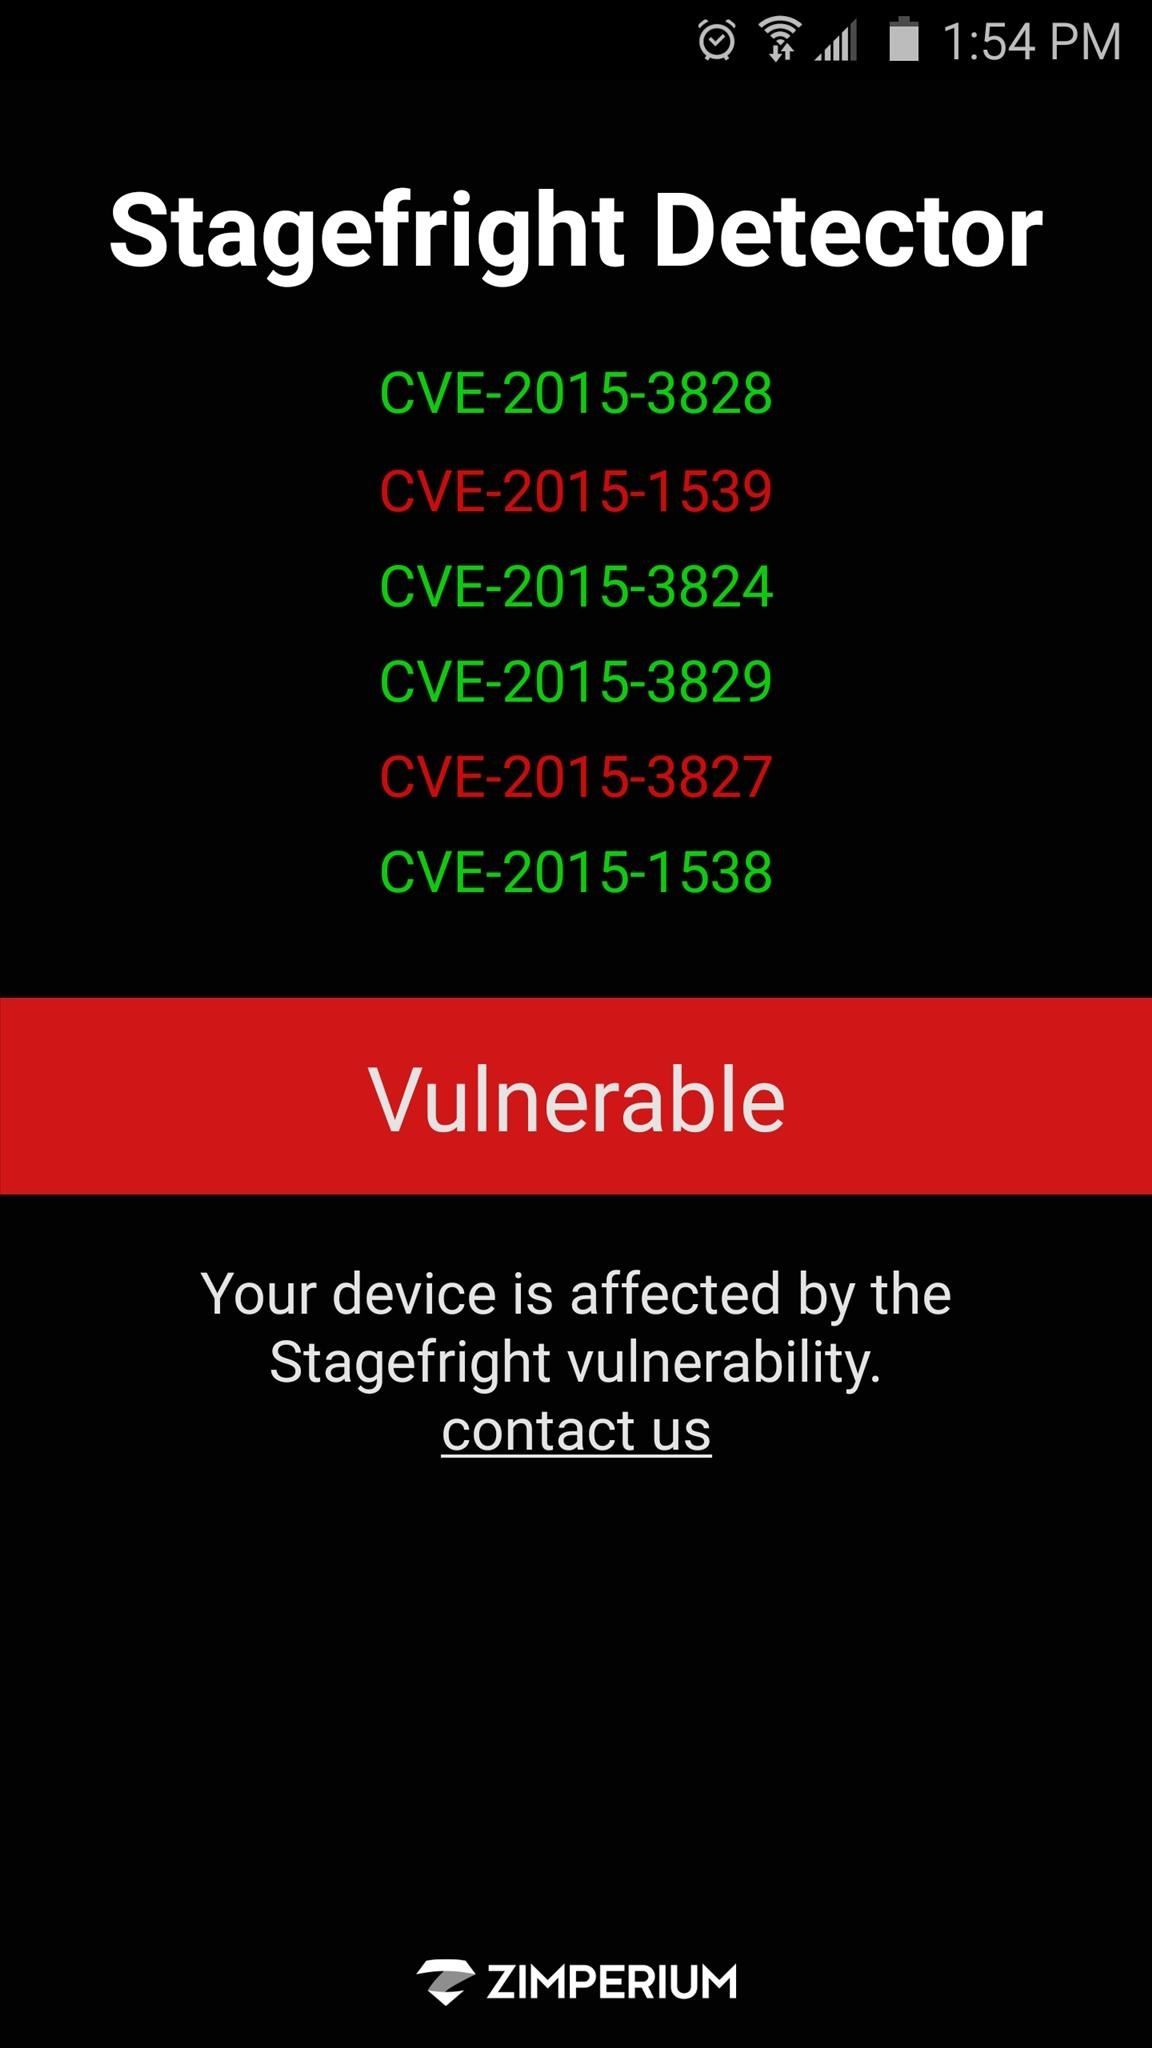 How to Check for the Stagefright Exploit on Your Android Device